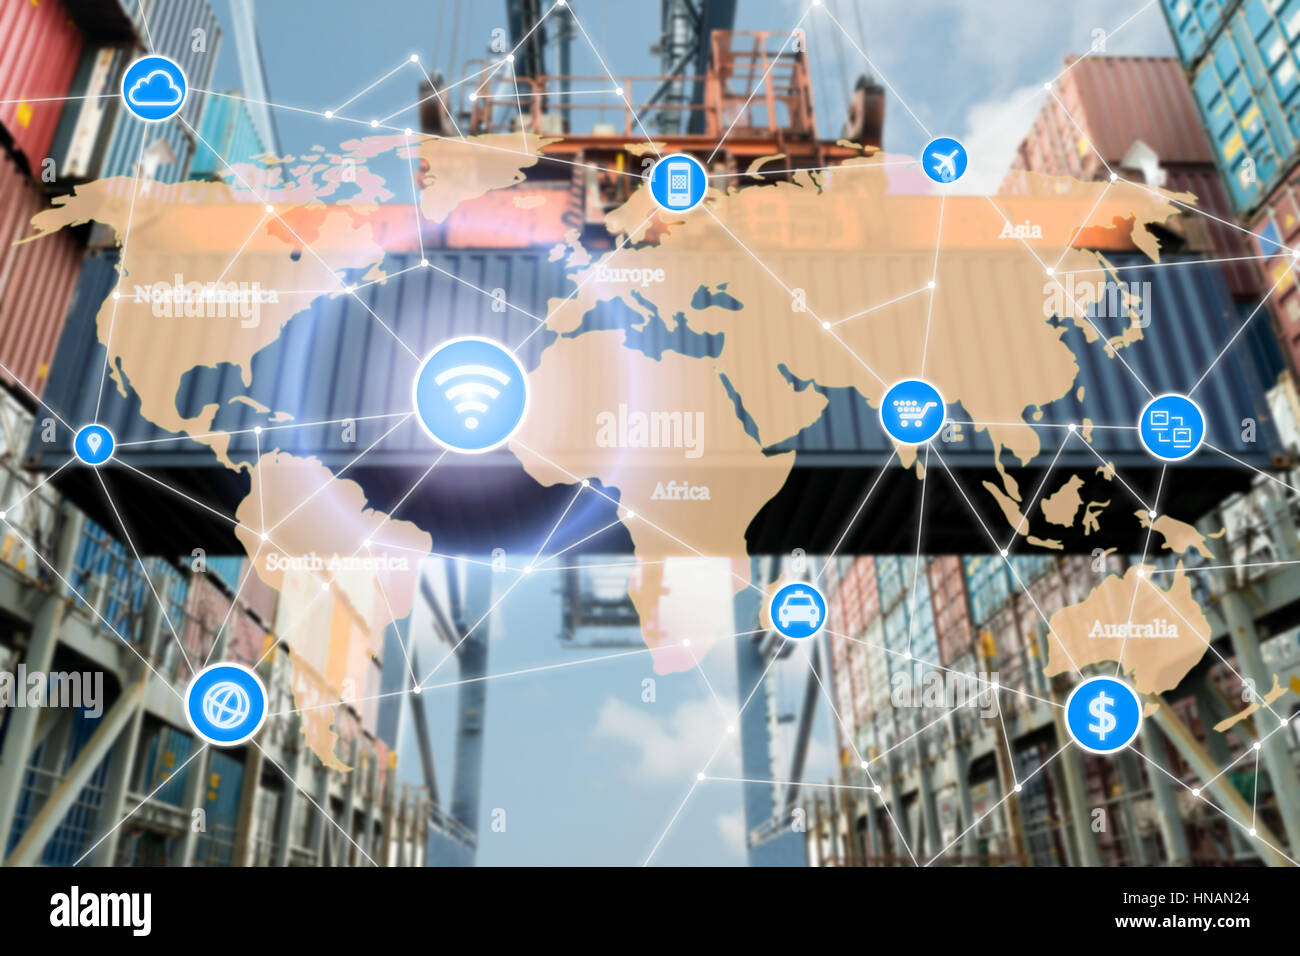 Smart technology concept with global logistics partnership for Logistics Import Export background Stock Photo